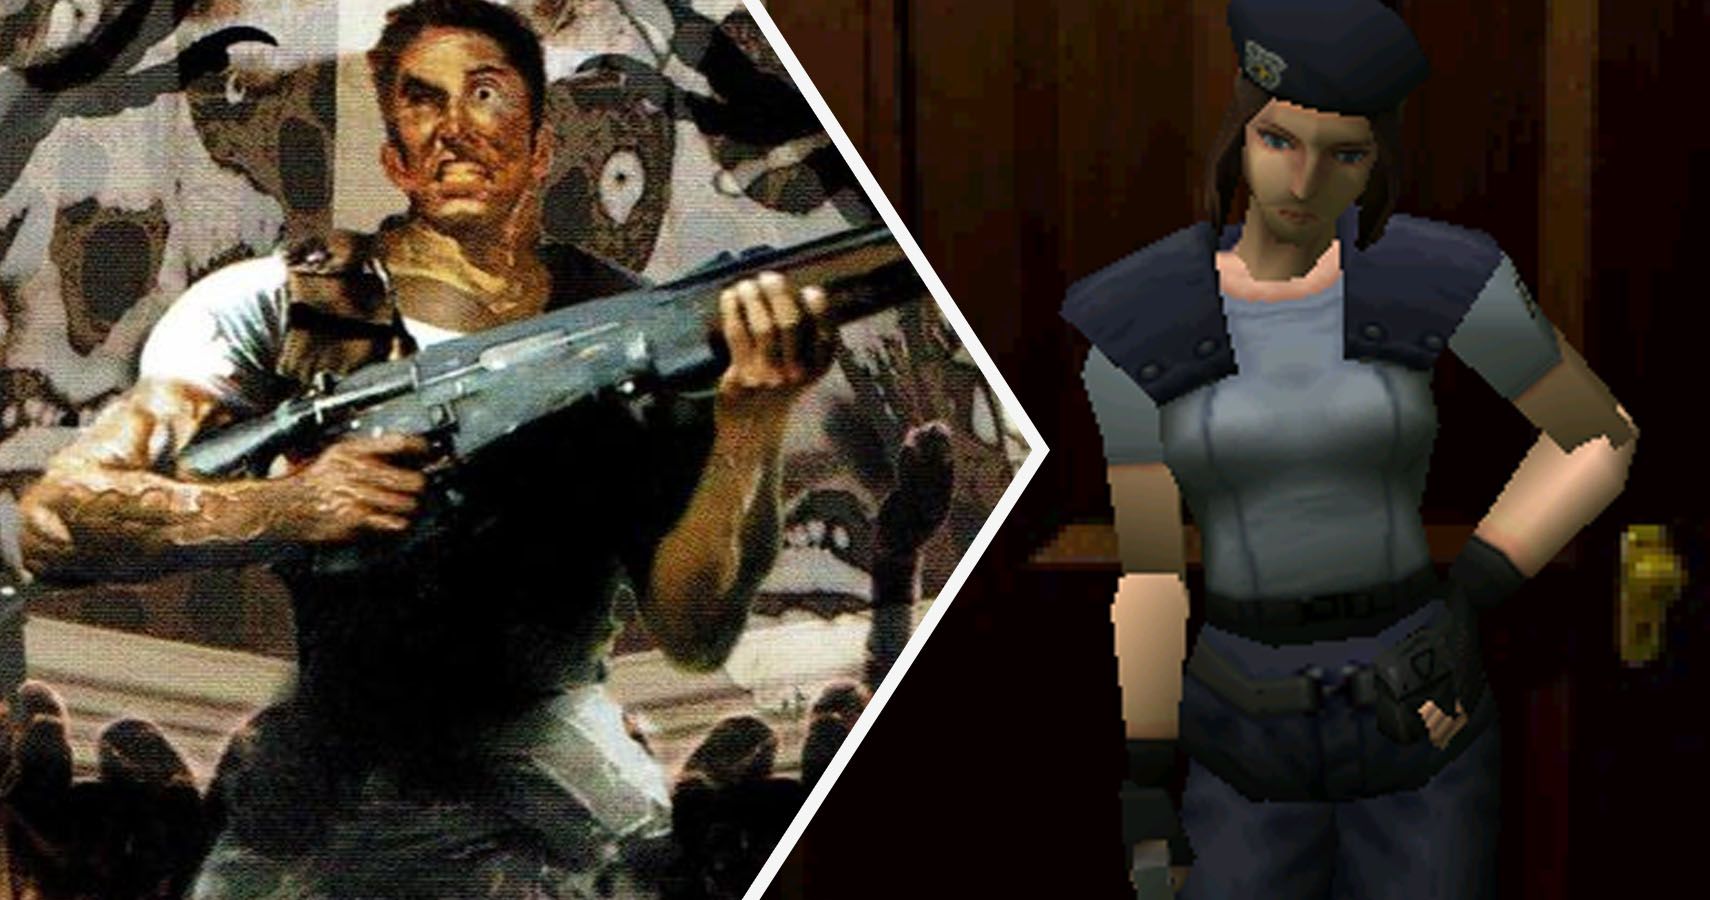 Resident Evil's Jill Valentine and Chris Redfield drop into